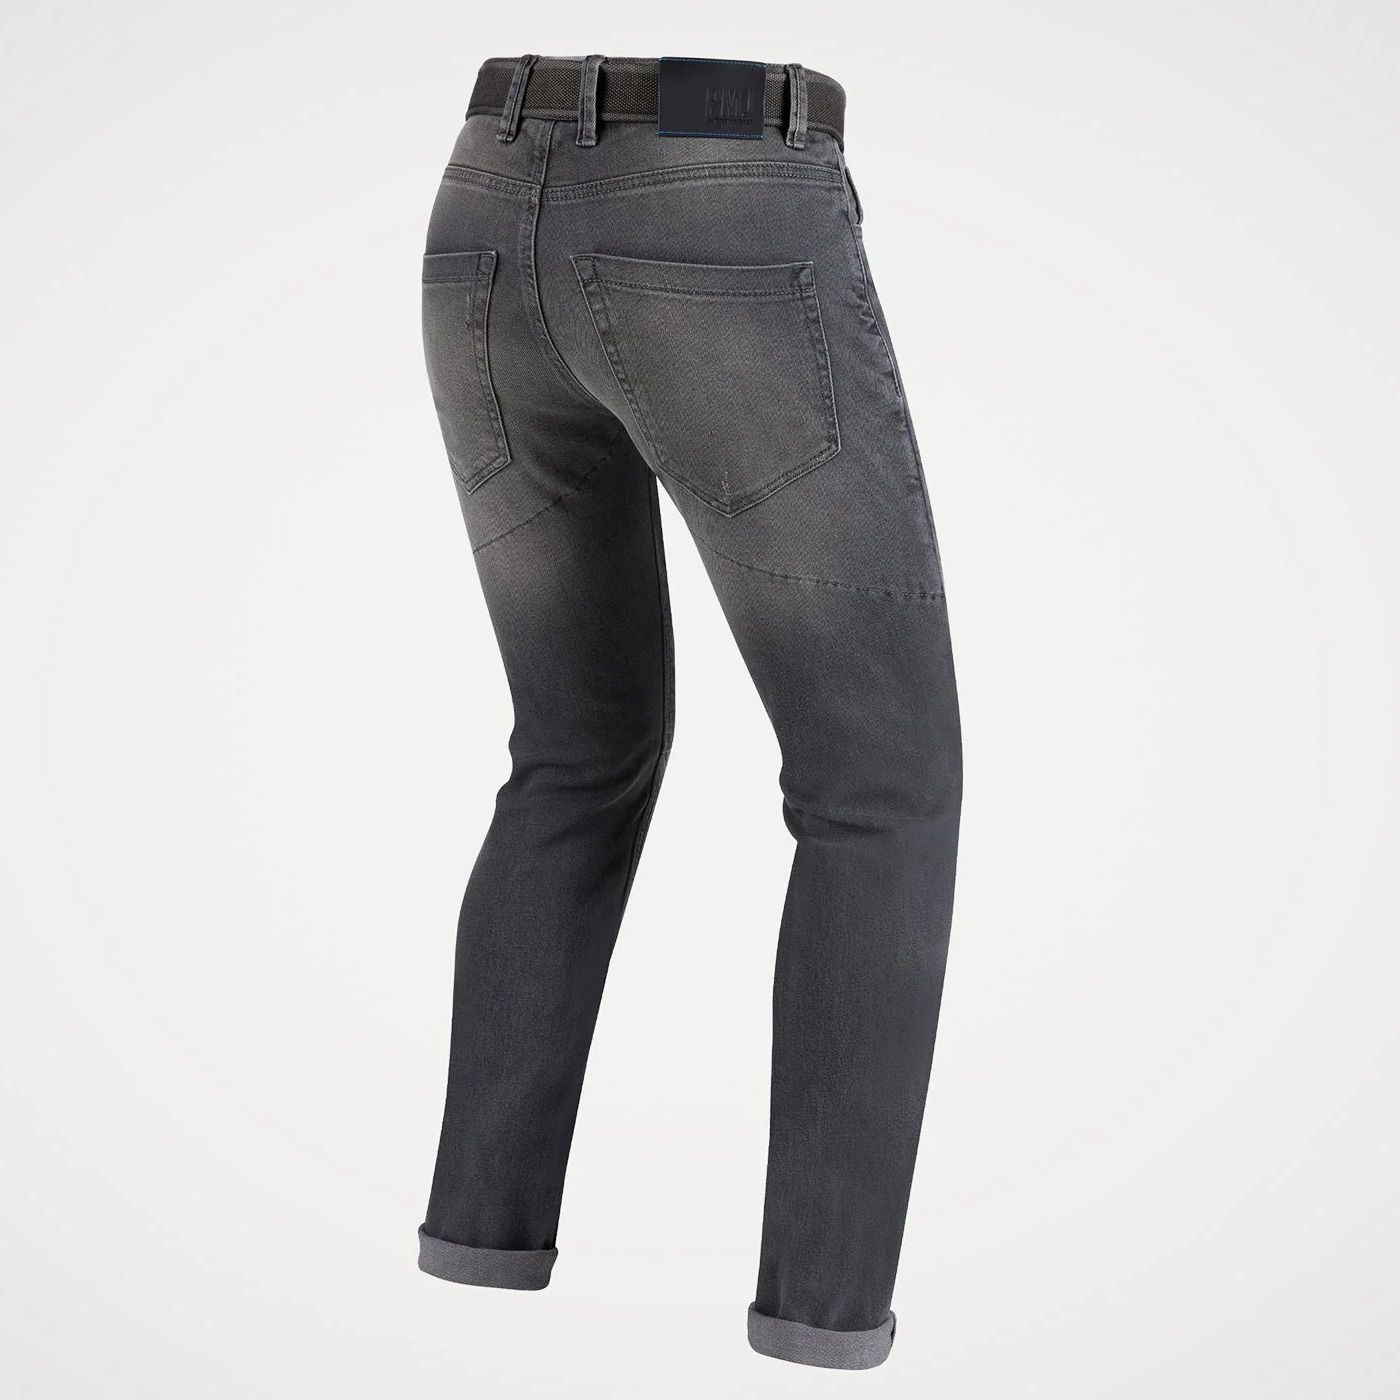  Quần Jeans PMJ Caferacer - Grey 